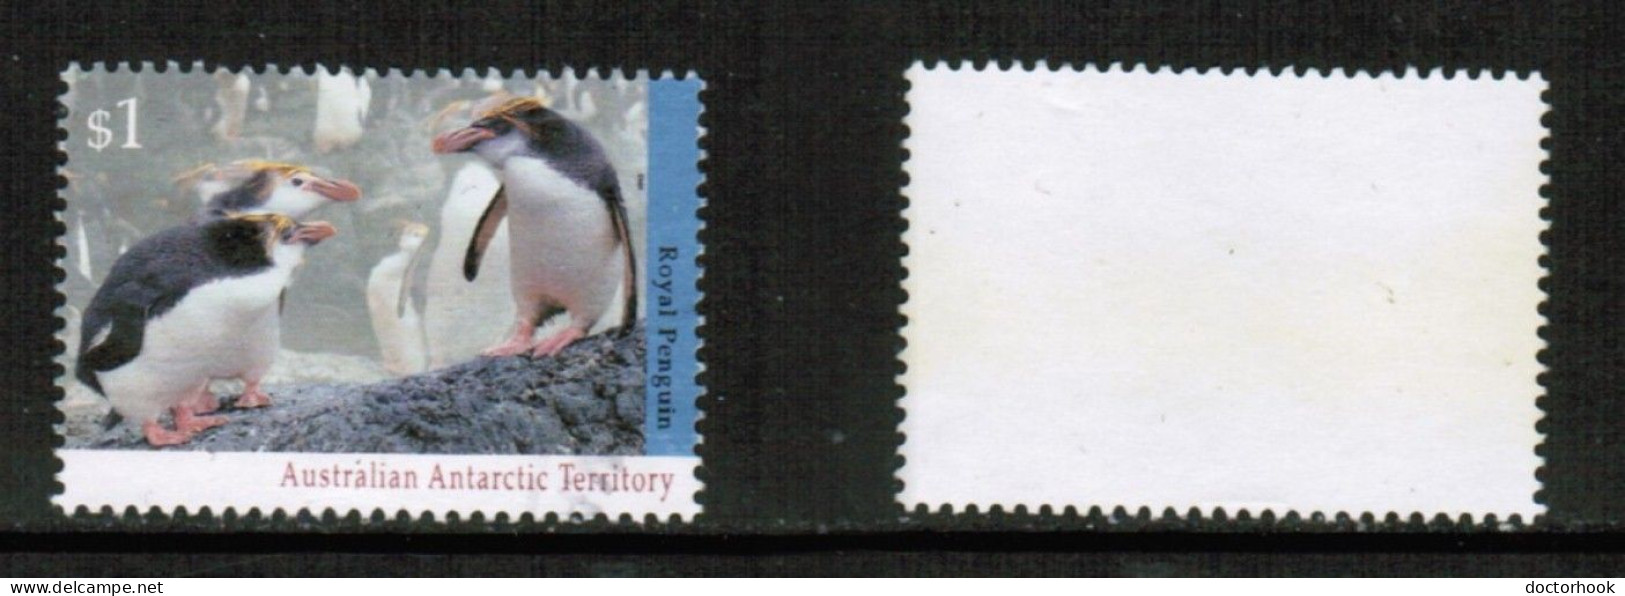 AUSTRALIAN ANTARCTIC TERRITORY   Scott # L 86A USED (CONDITION AS PER SCAN) (Stamp Scan # 928-6) - Used Stamps